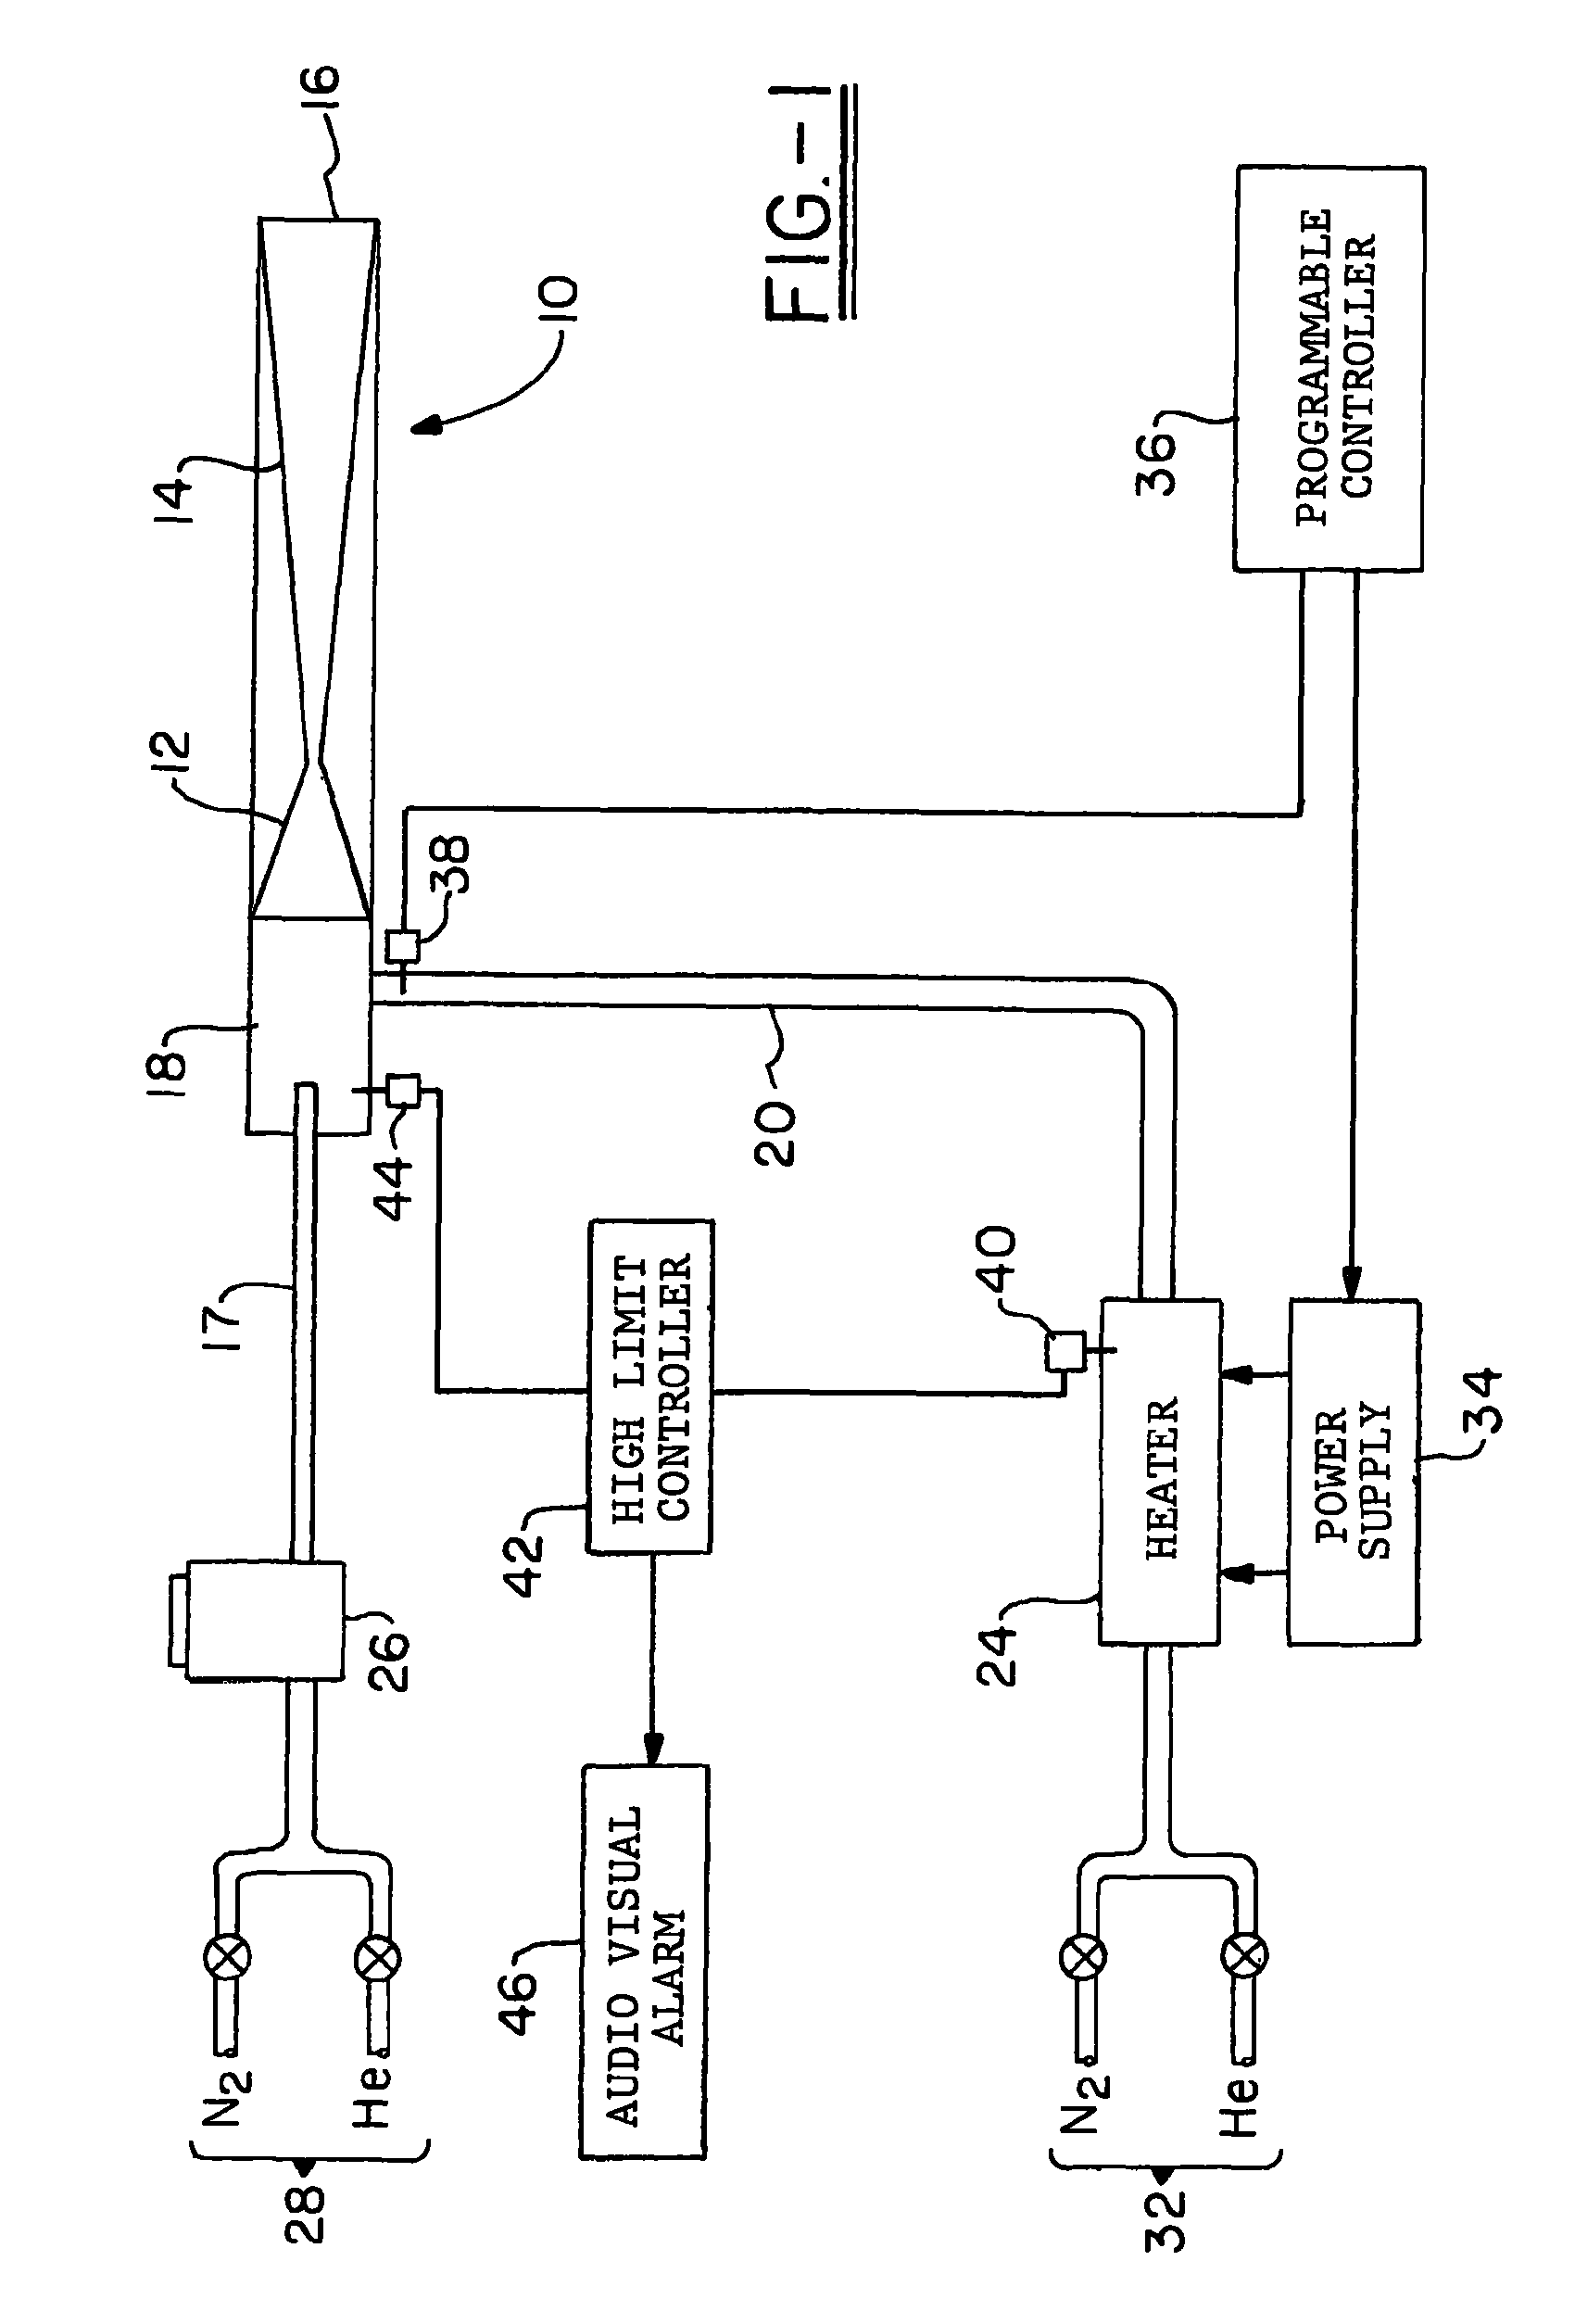 Spray nozzle assembly for gas dynamic cold spray and method of coating a substrate with a high temperature coating